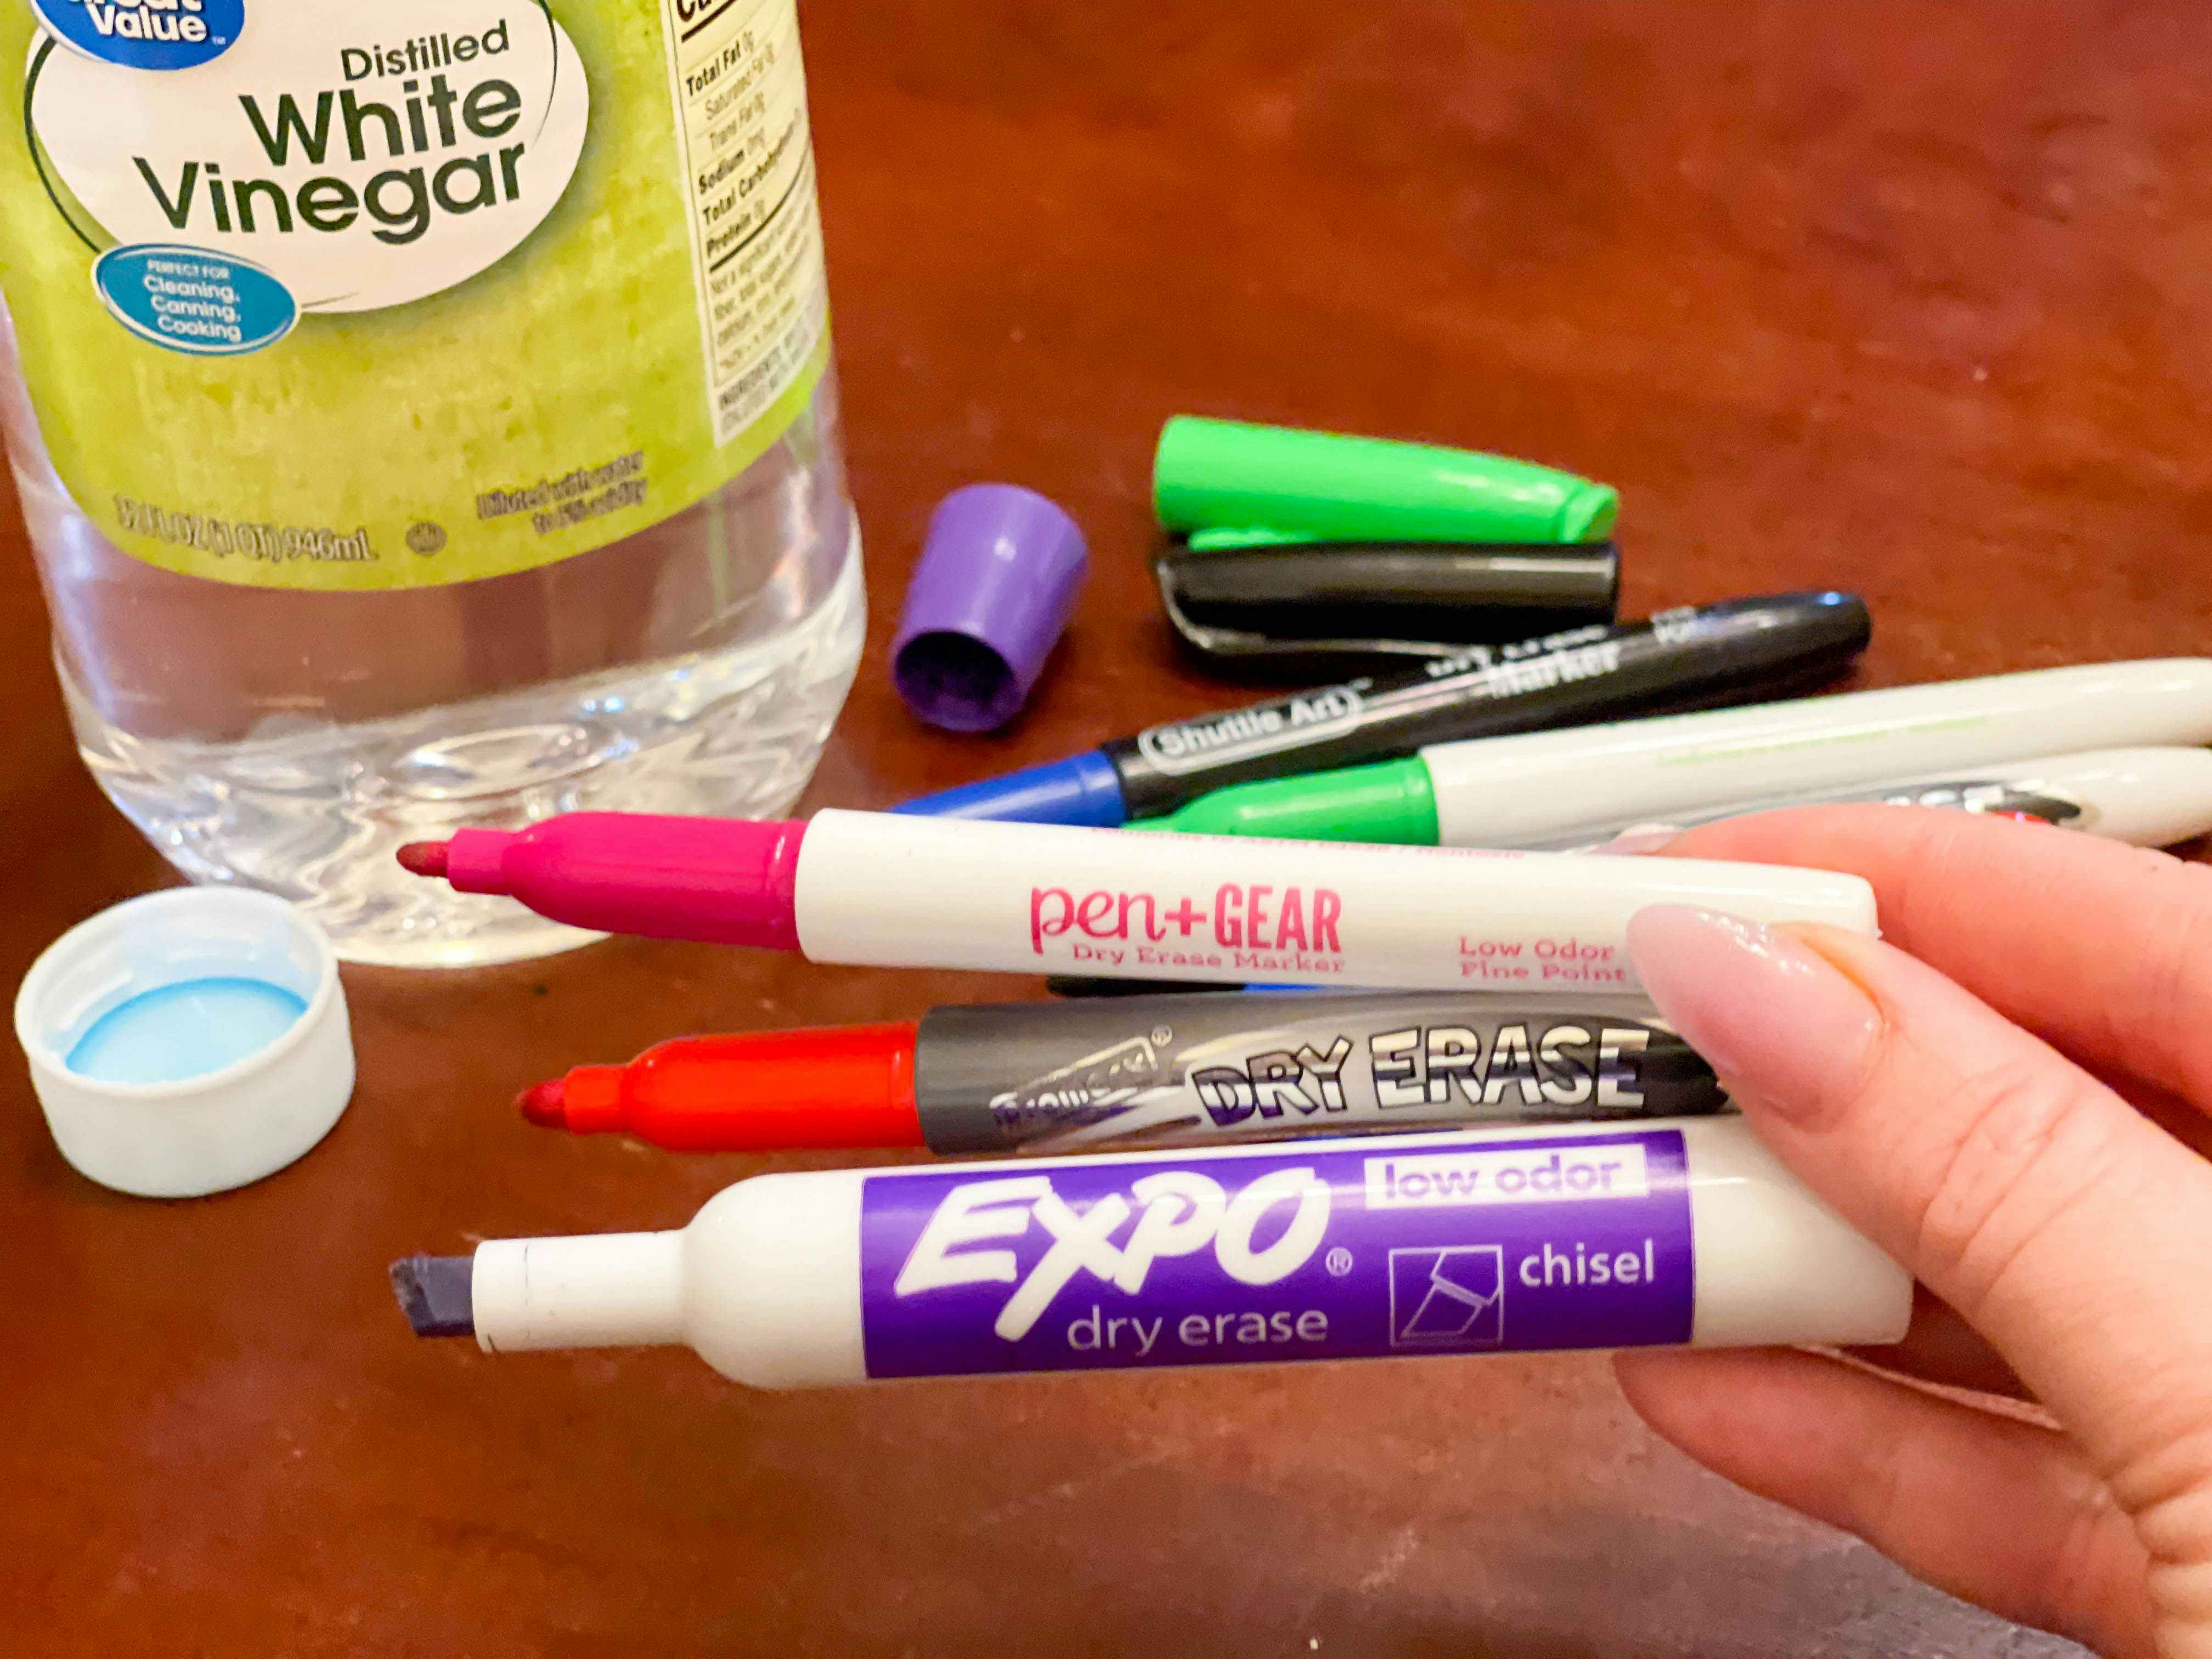 https://prod-cdn-thekrazycouponlady.imgix.net/wp-content/uploads/2022/02/dried-out-dry-erase-magic-marker-hacks-tips-vinegar-2022-2-1646800660-1646800660.jpg?auto=format&fit=fill&q=25